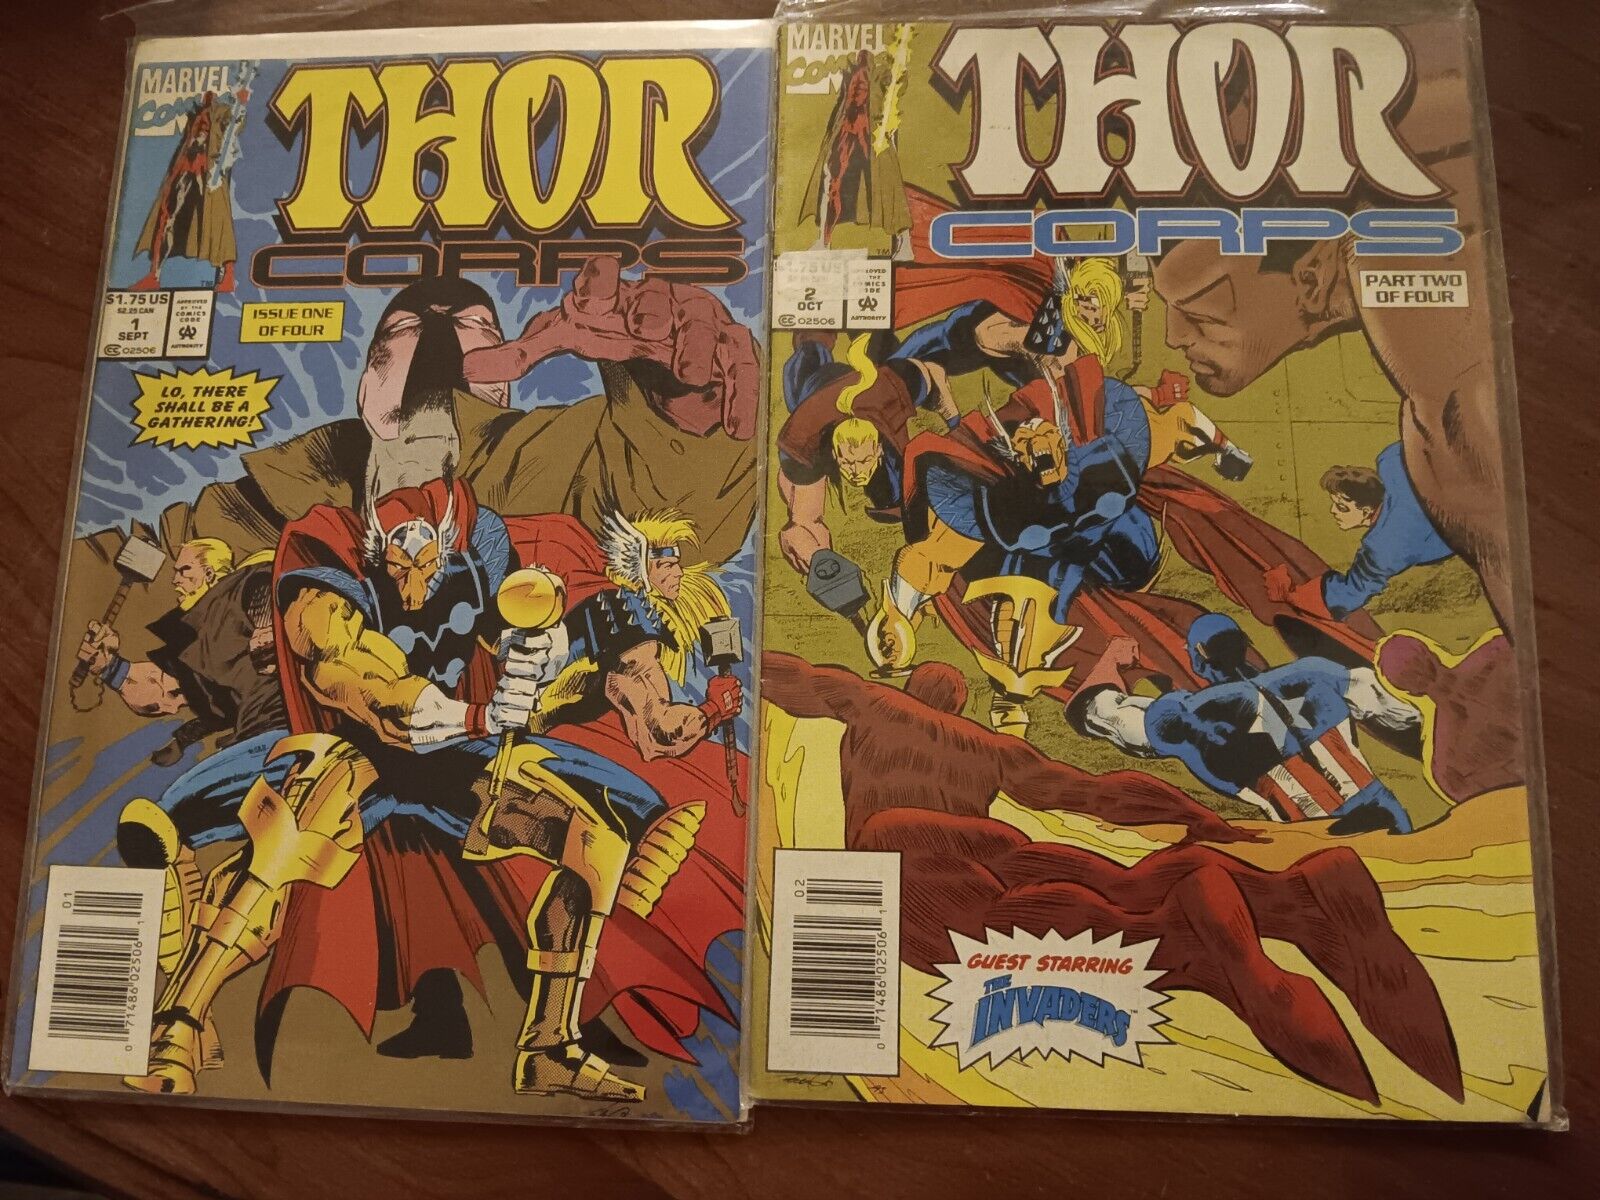 Lot of 2 - Thor Corps Comics- Issues 1 & 2